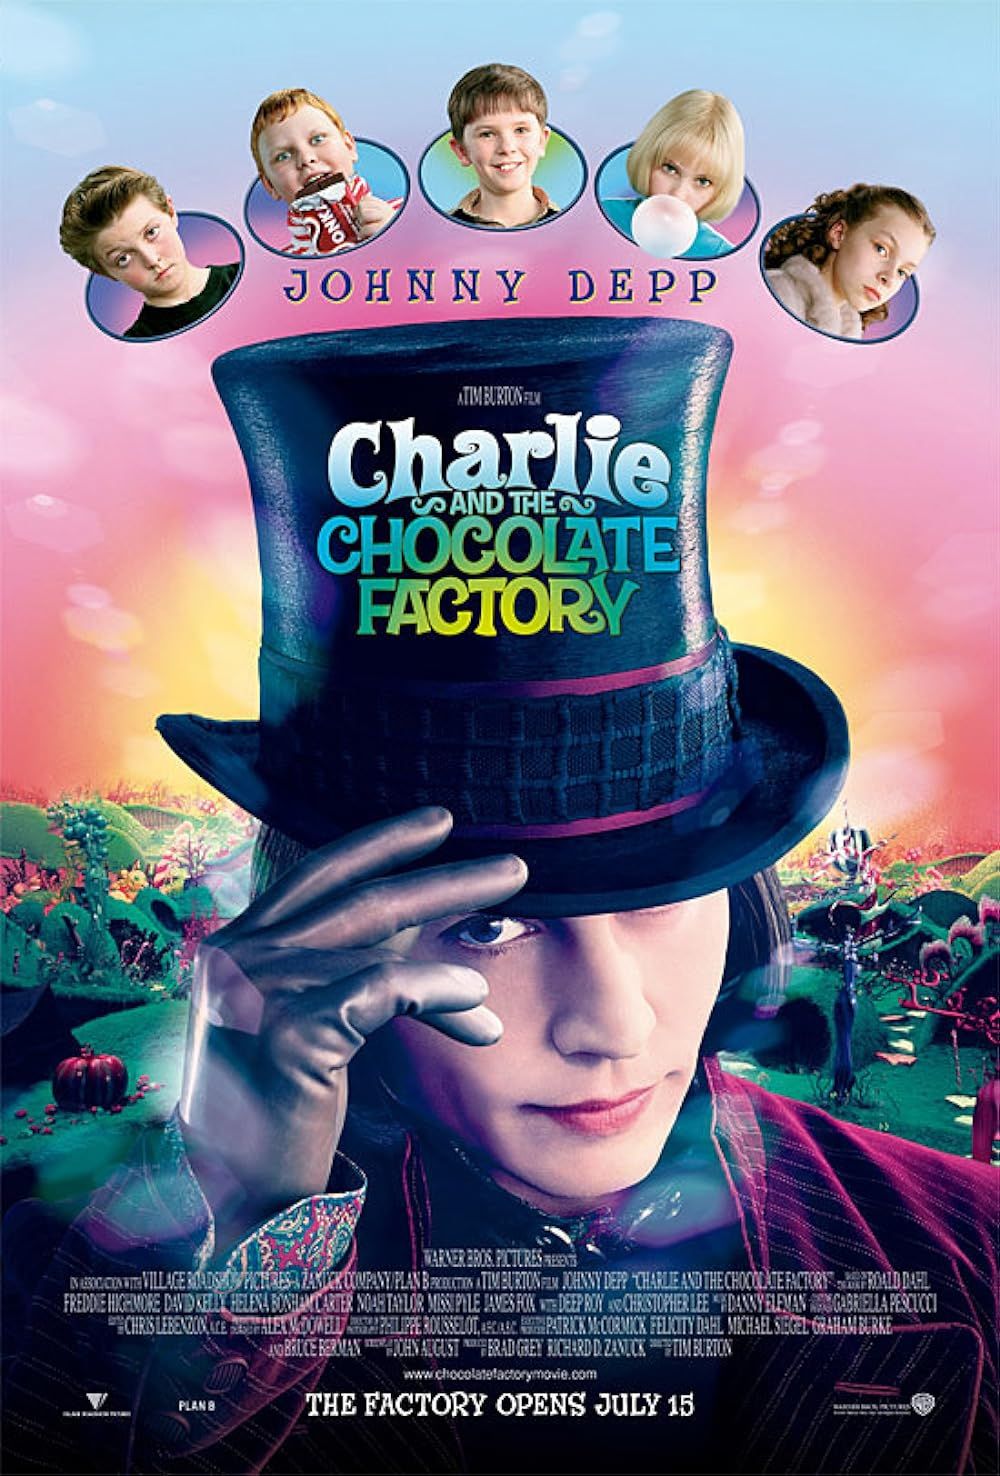 The Cast on the Charlie and the Chocolate Factory Poster